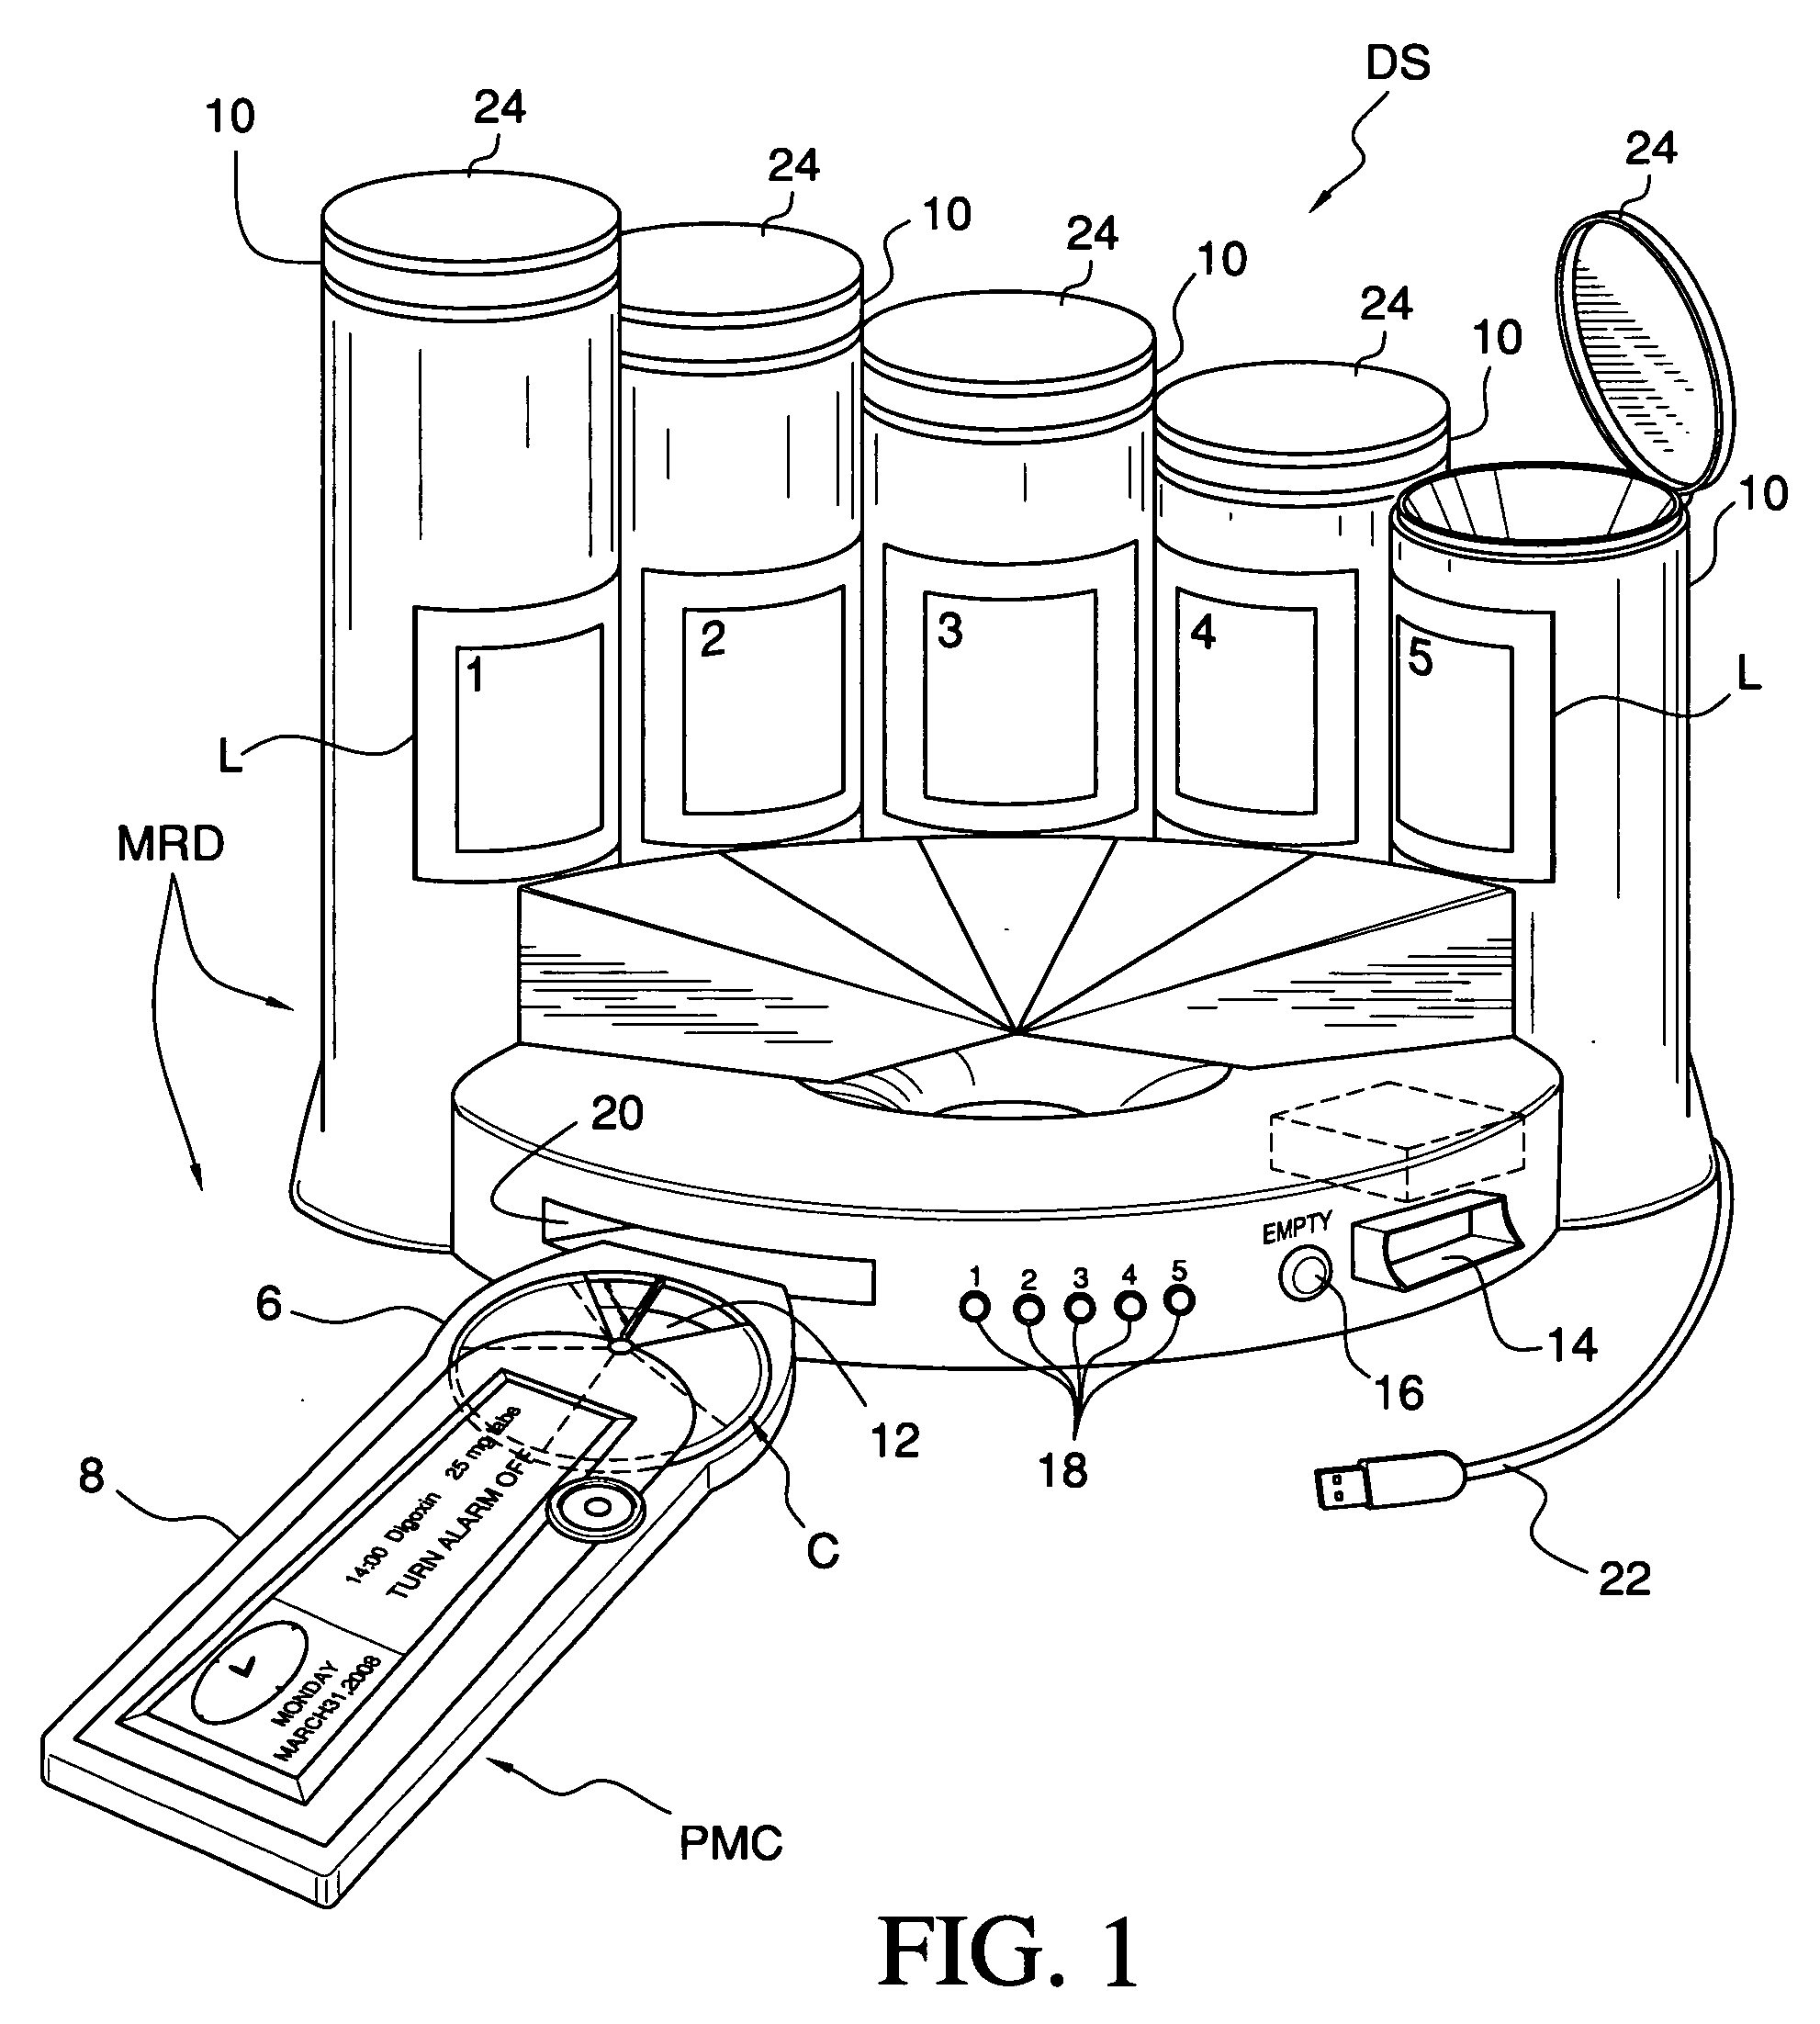 Automatic medication reminder and dispensing device, system , and method therefor